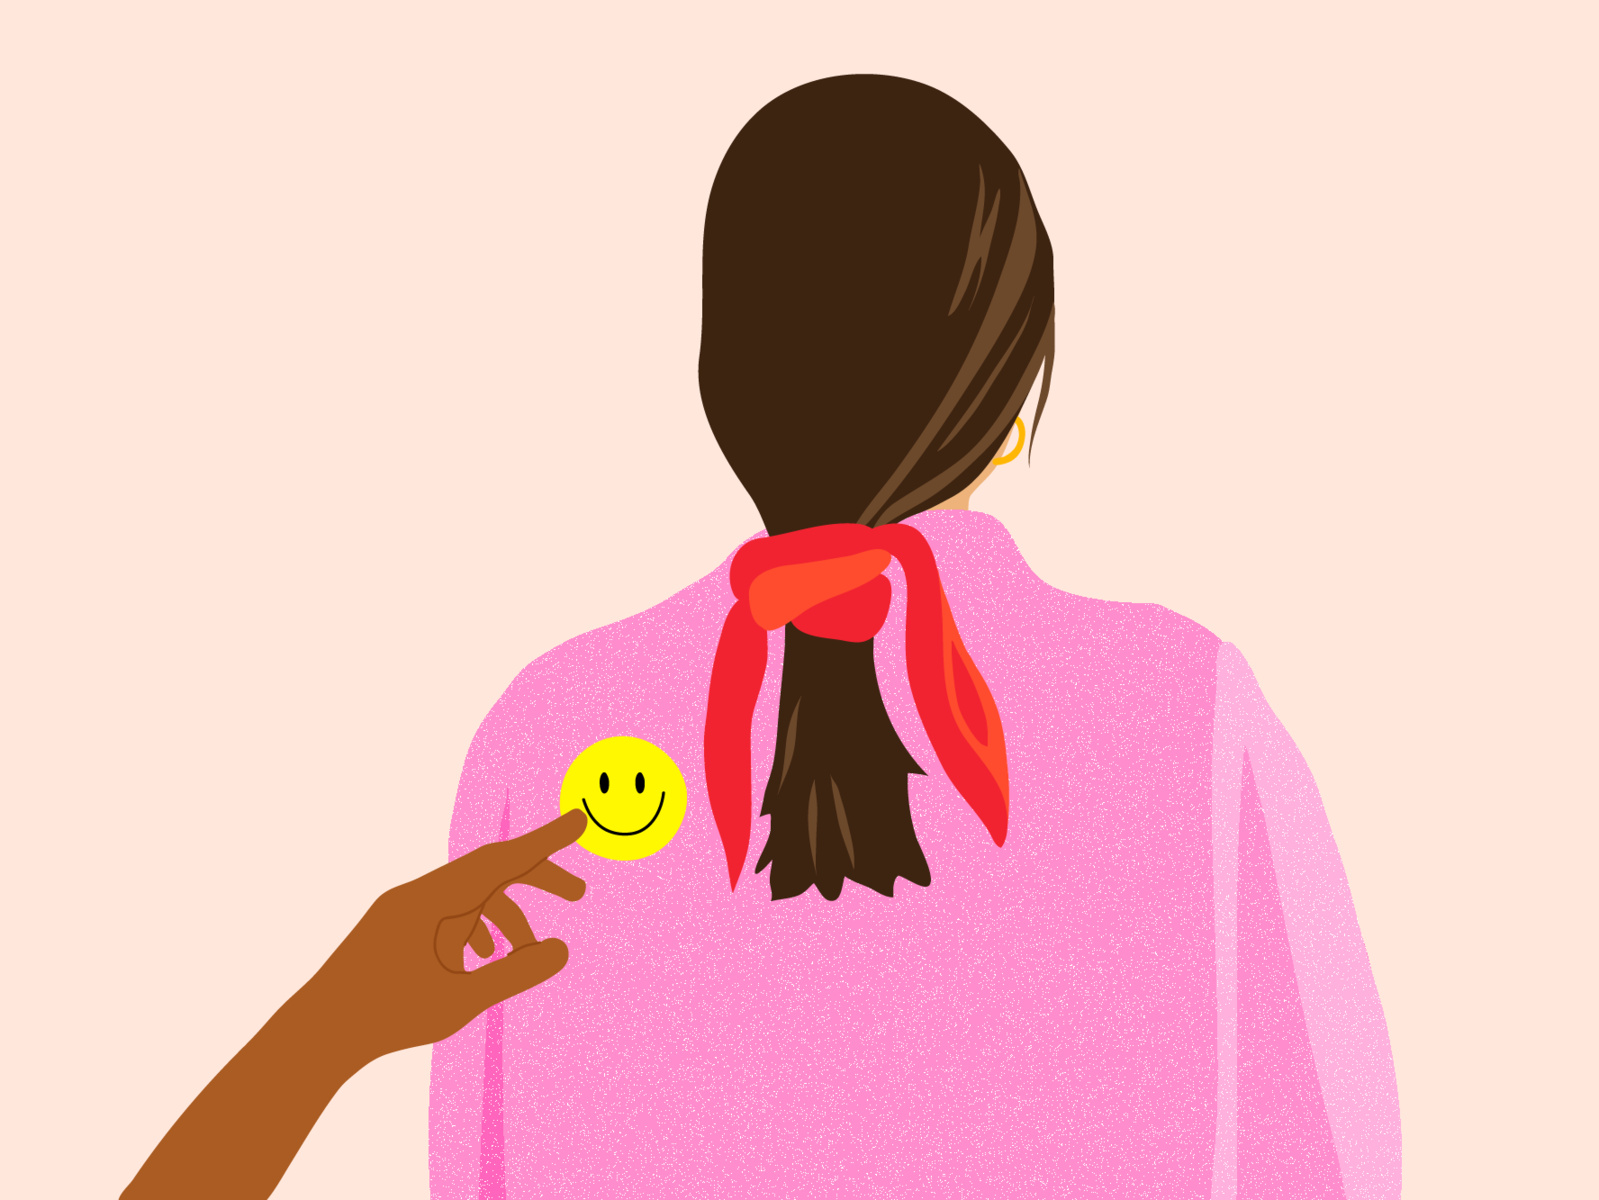 A woman wearing a pink top with red scrunchie, a smiley face on her back while a hand is pointing at the smiley face emoji